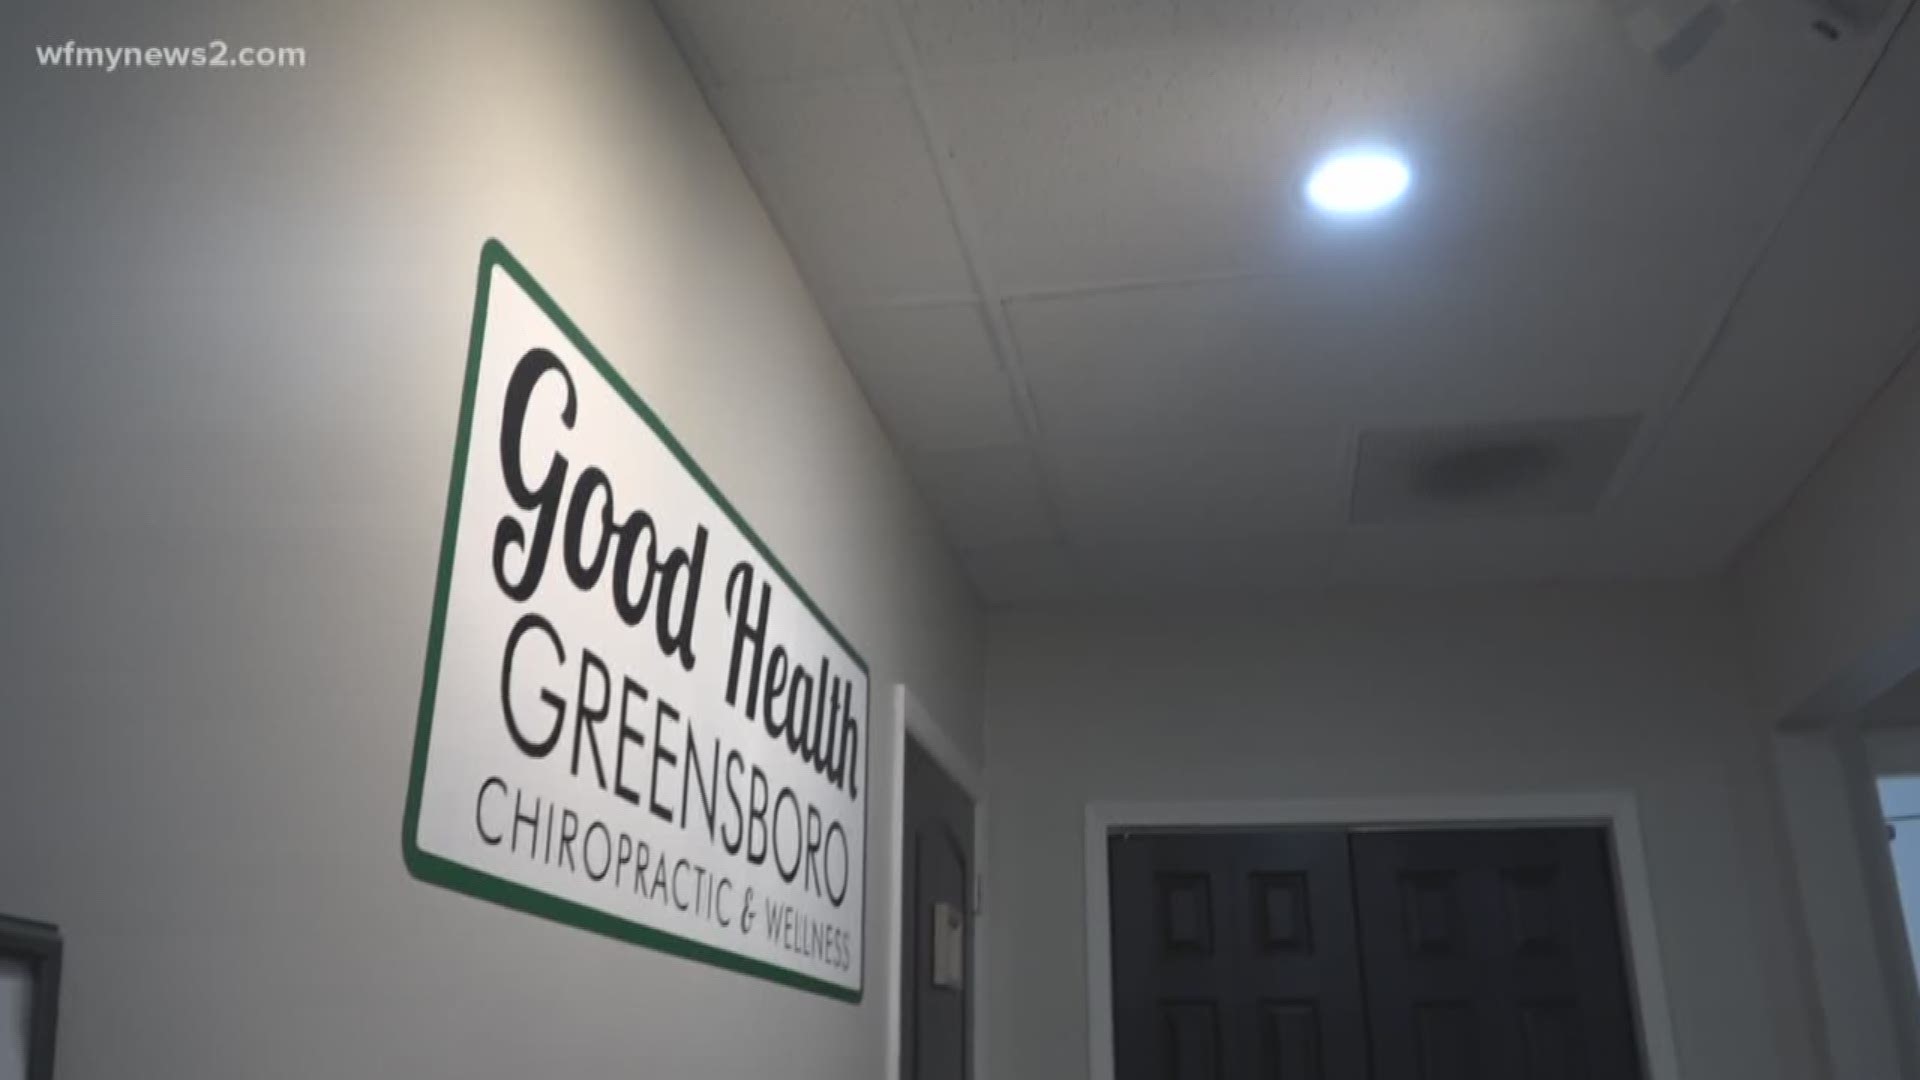 Greensboro Chiropractors reached out to doctors and nurses to give them a little service after they've been hard at work serving the community.